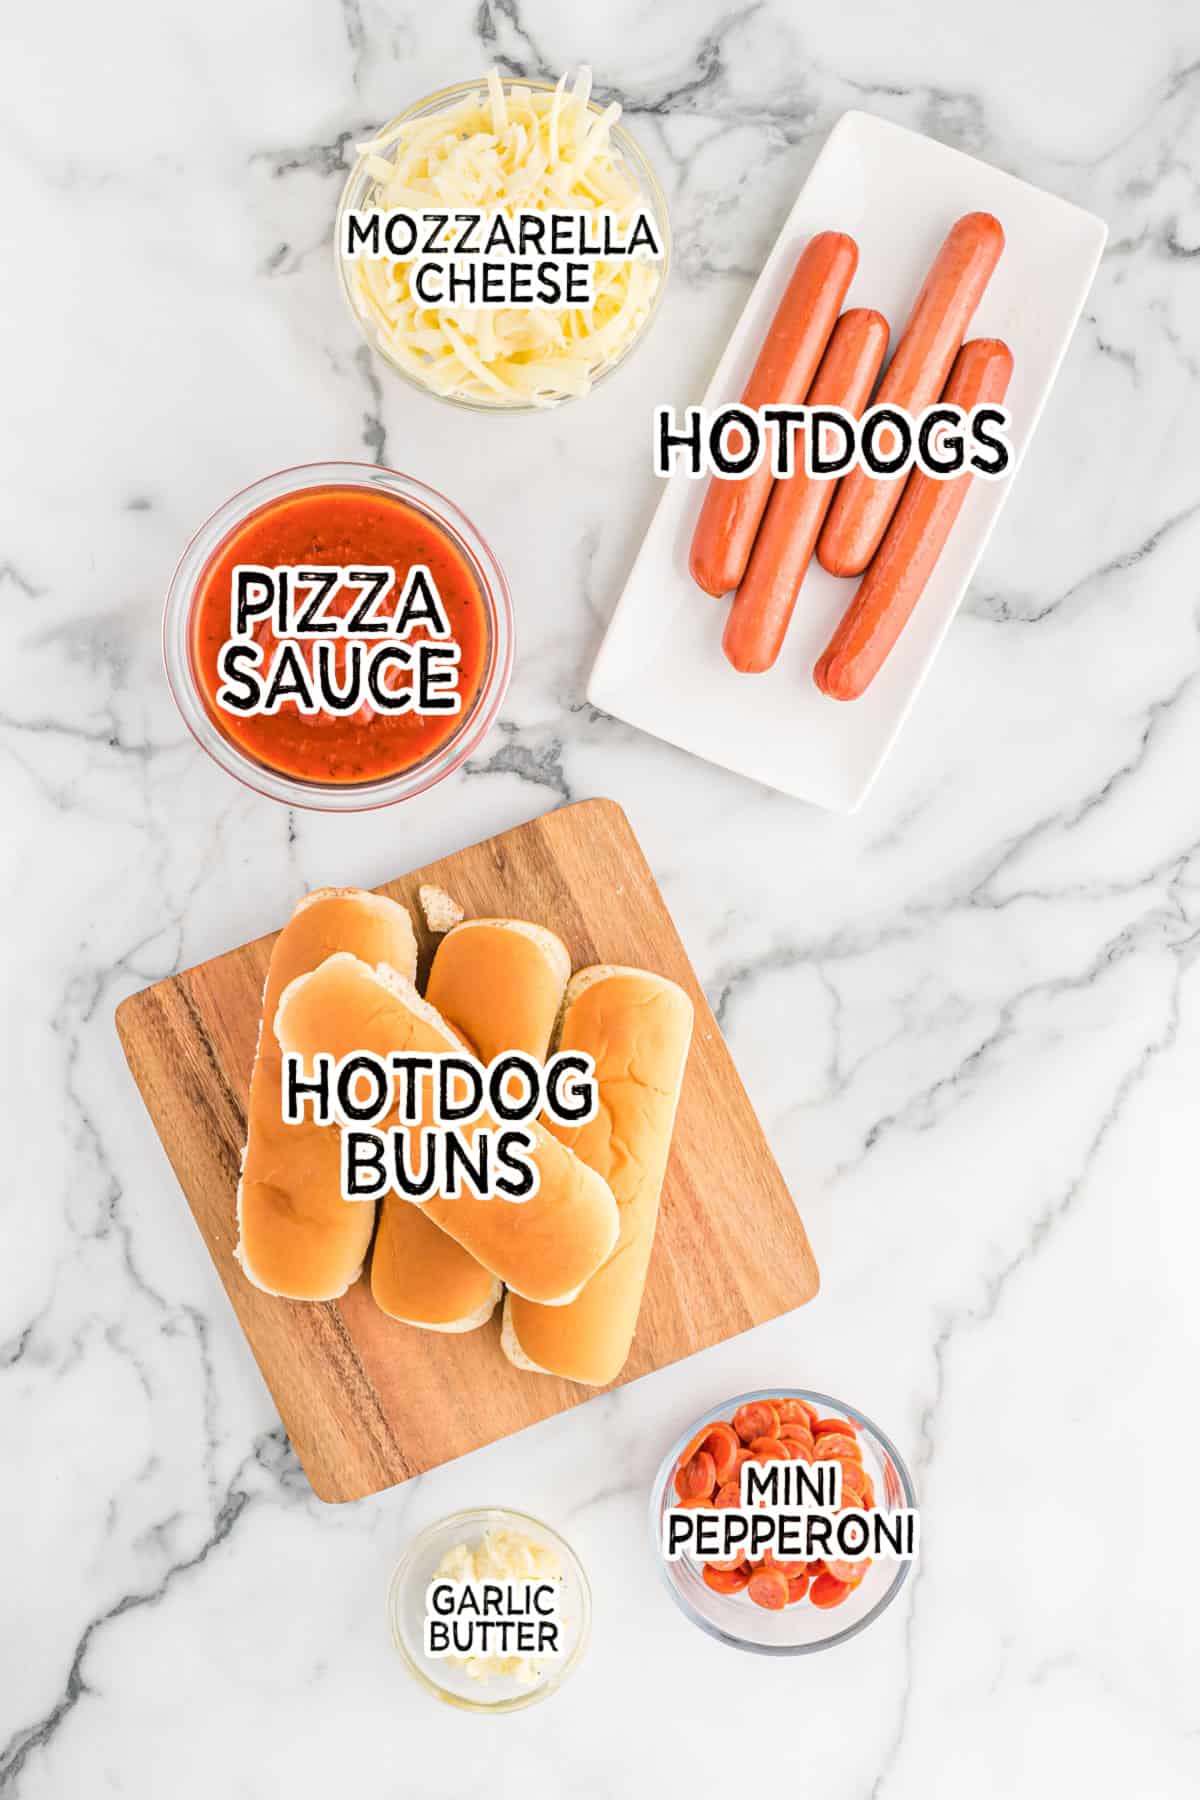 Pizza hot dog ingredients.